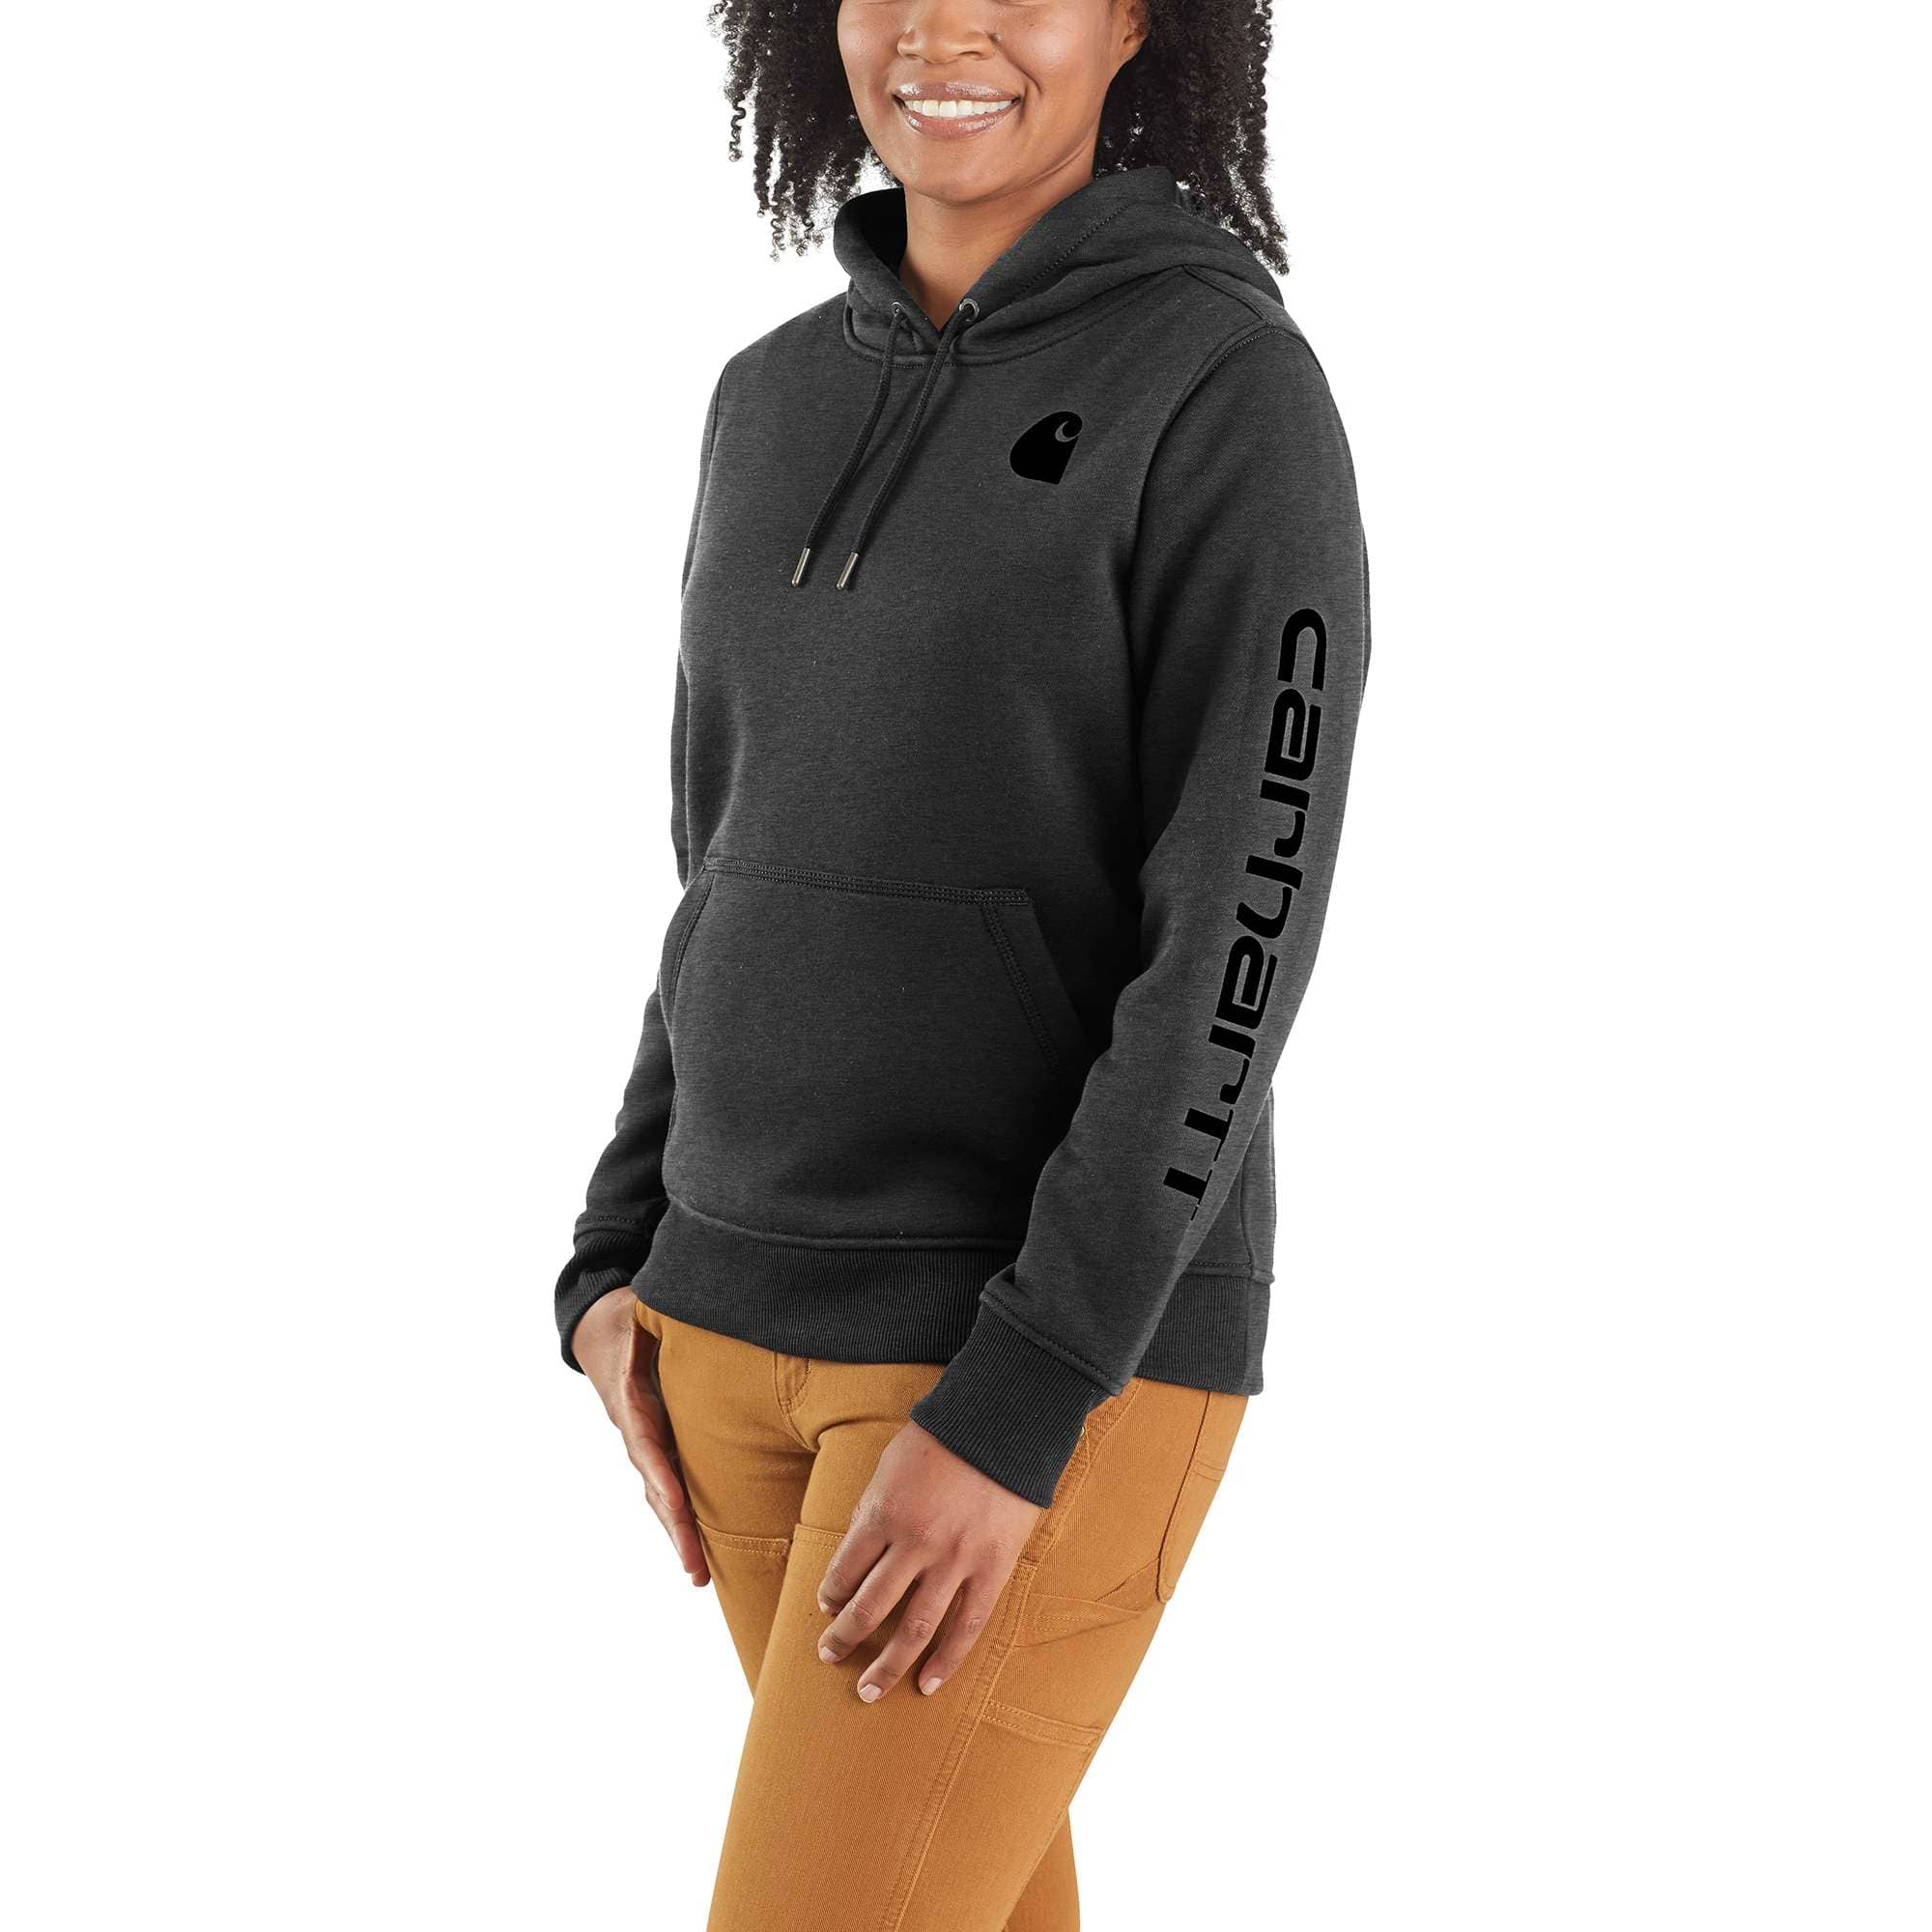 Carhartt Women's Relaxed Fit Heavyweight Long-Sleeve Hooded Thermal Shirt 